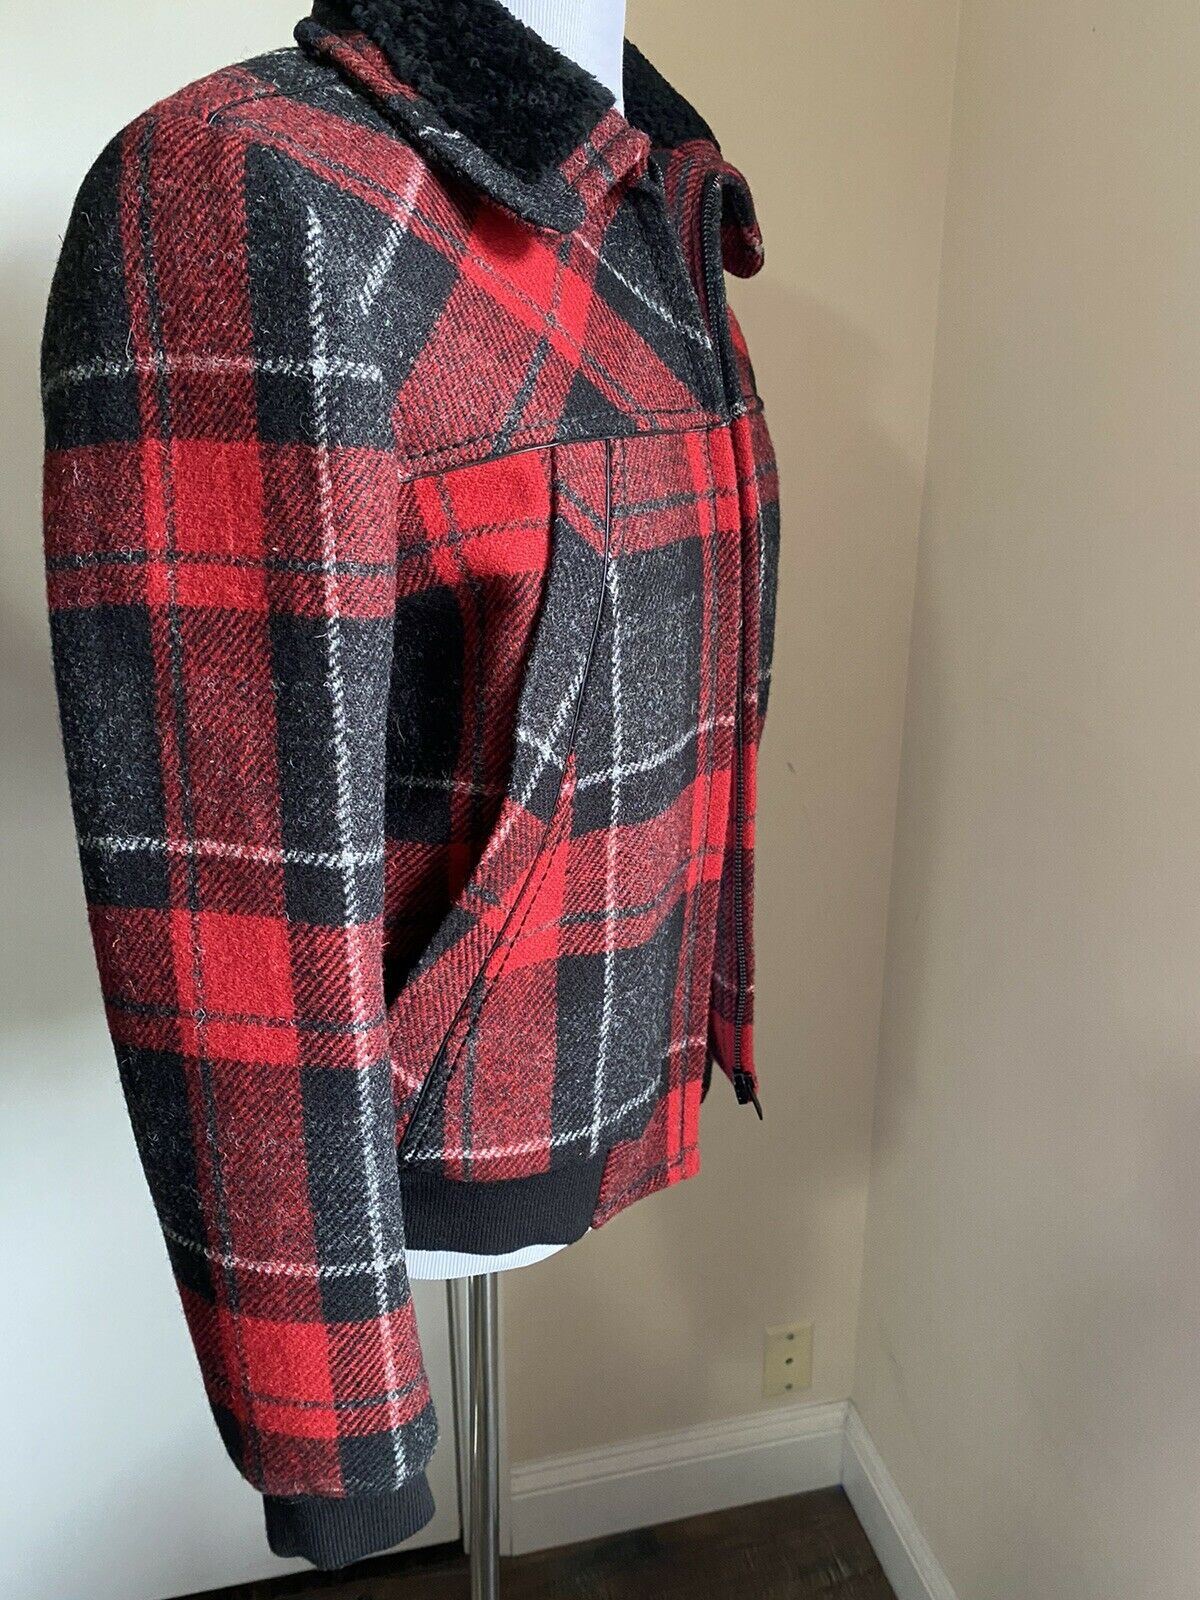 New $3190 Saint Laurent Men quilted Jacket In Tartan With Shearing Red/Bl. 38 US